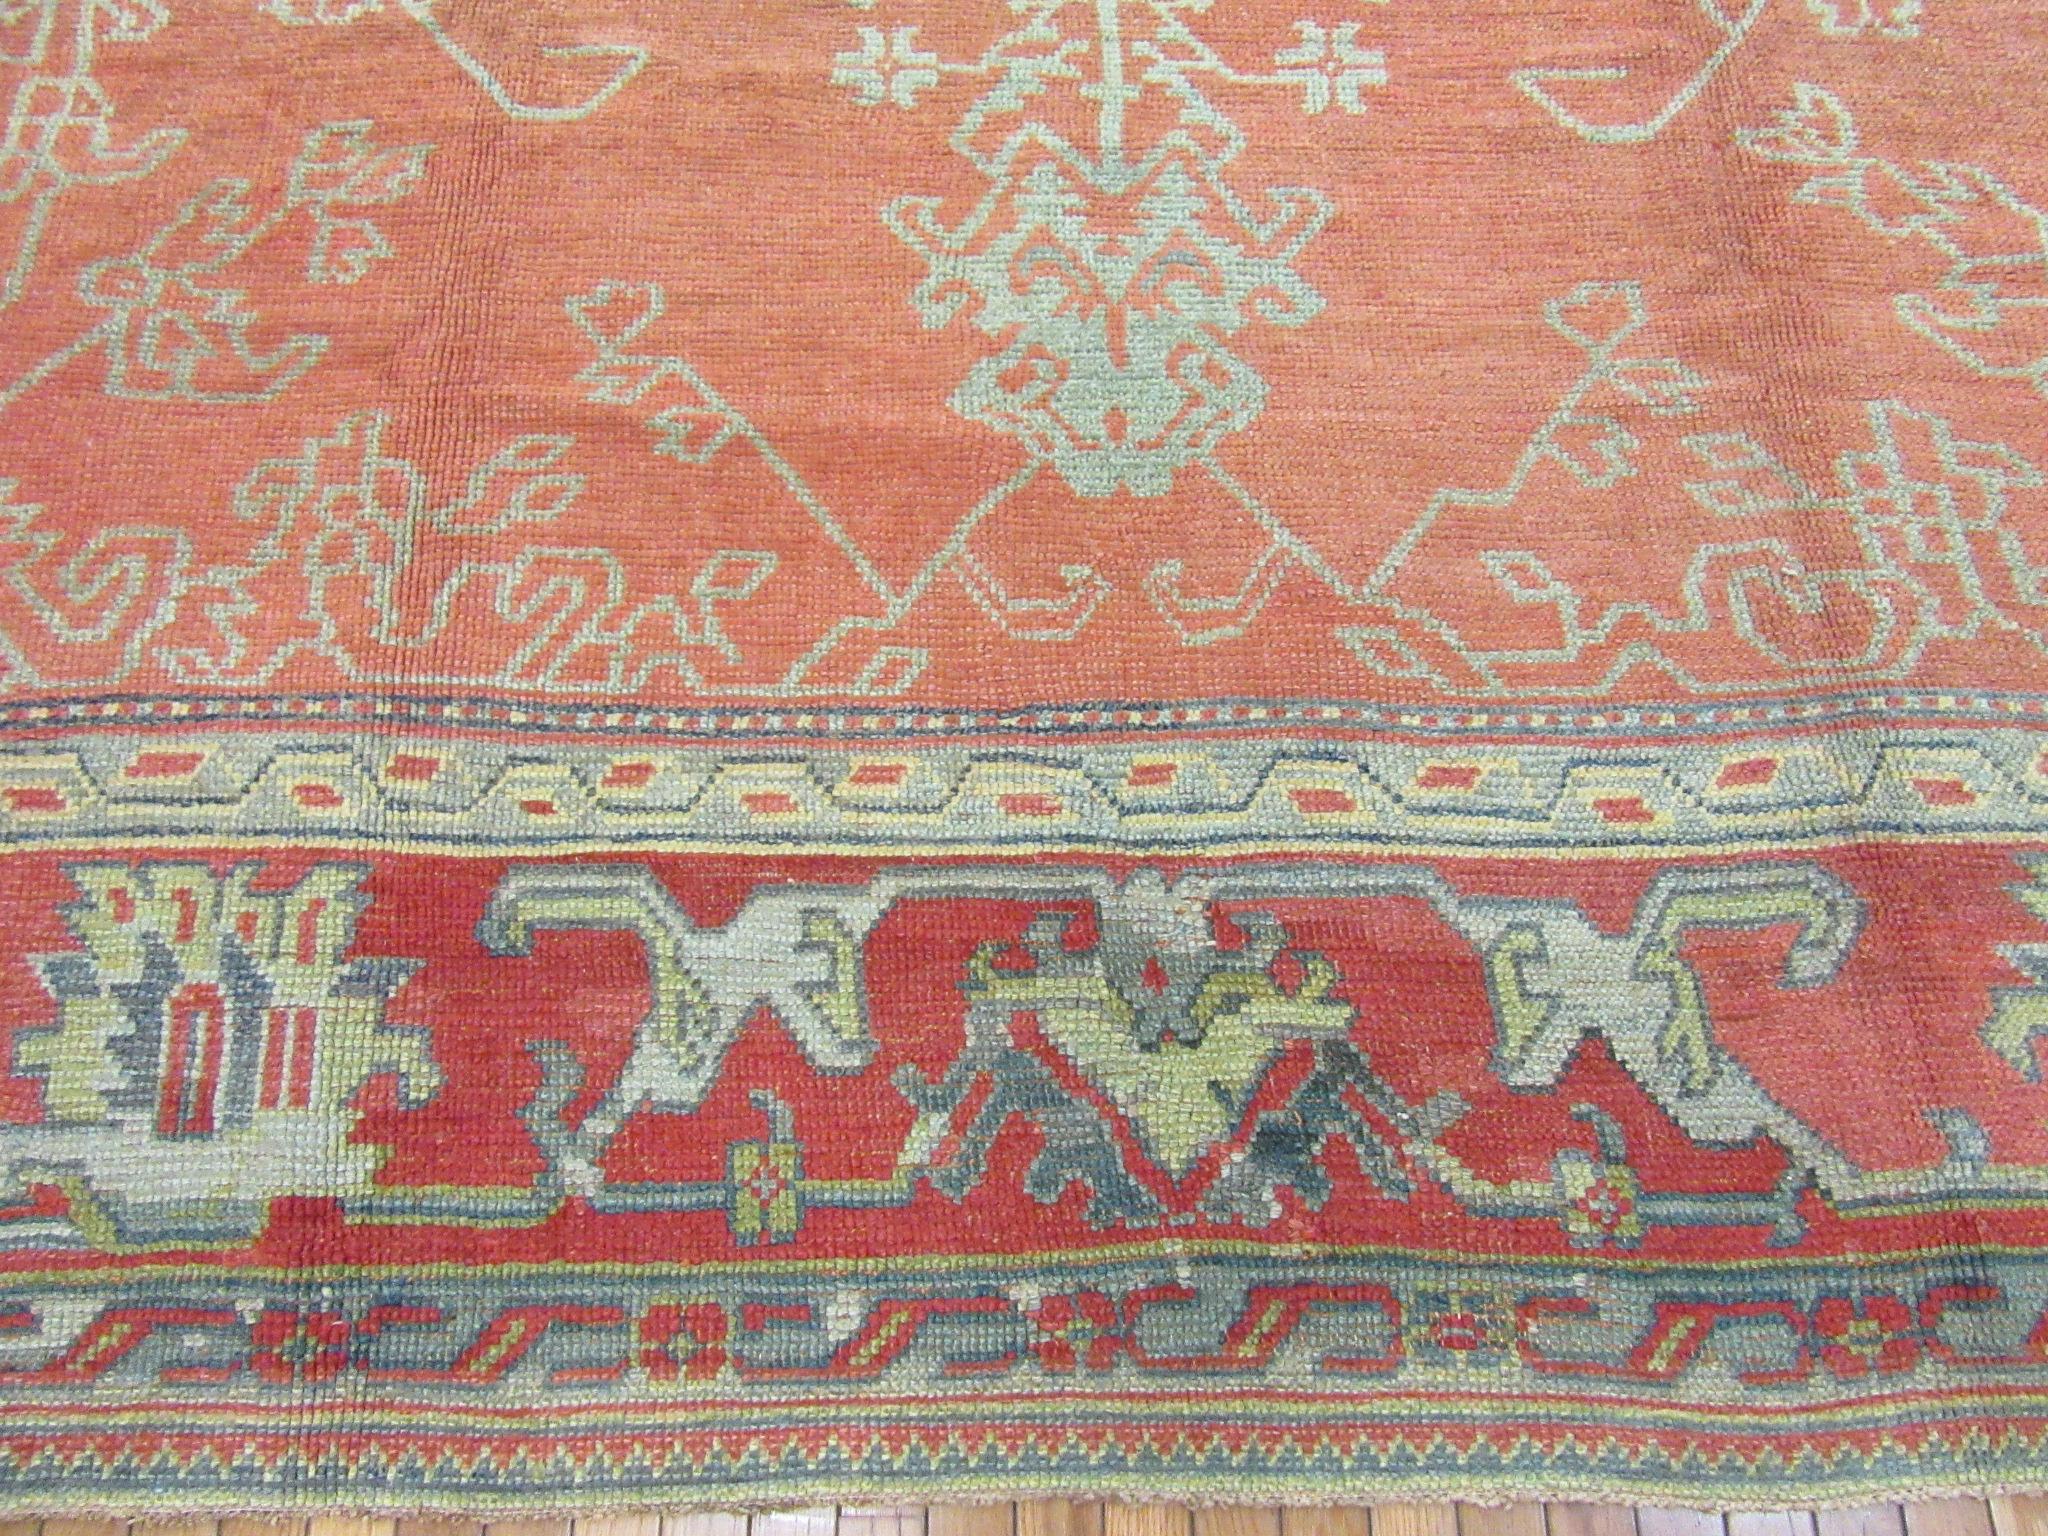 20th Century Large Antique Hand-Knotted Wool Coral Red Green Turkish Oushak Rug For Sale